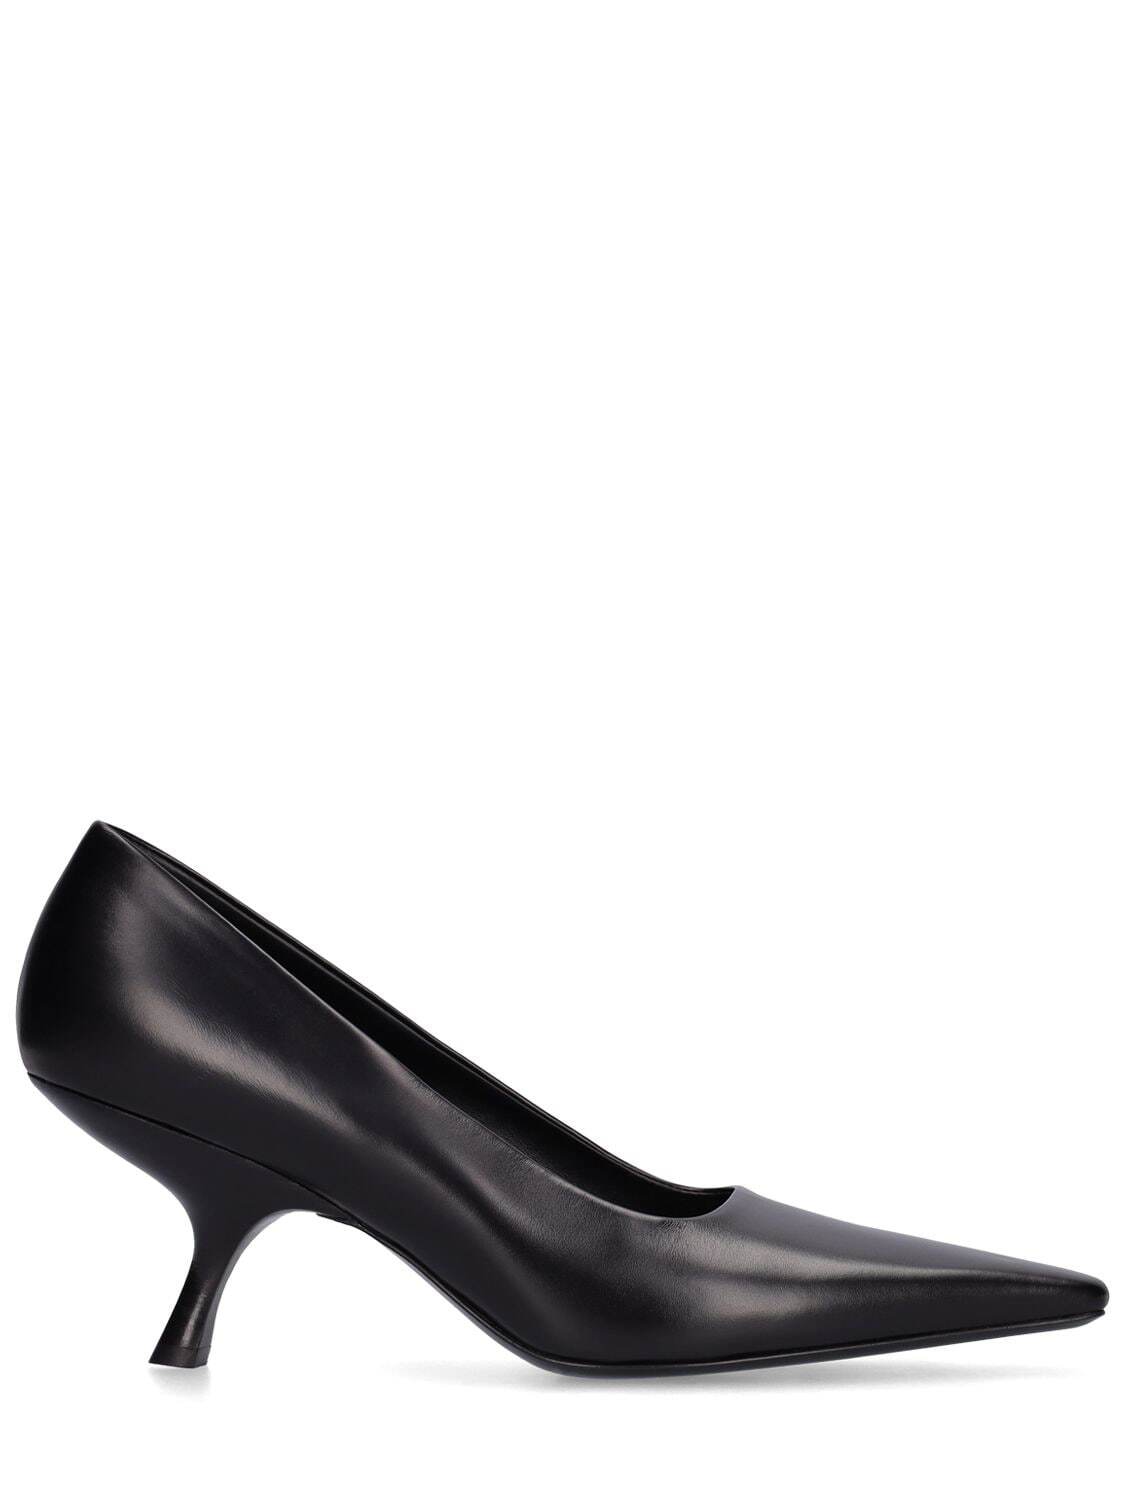 THE ROW 65mm Leather Pumps in black